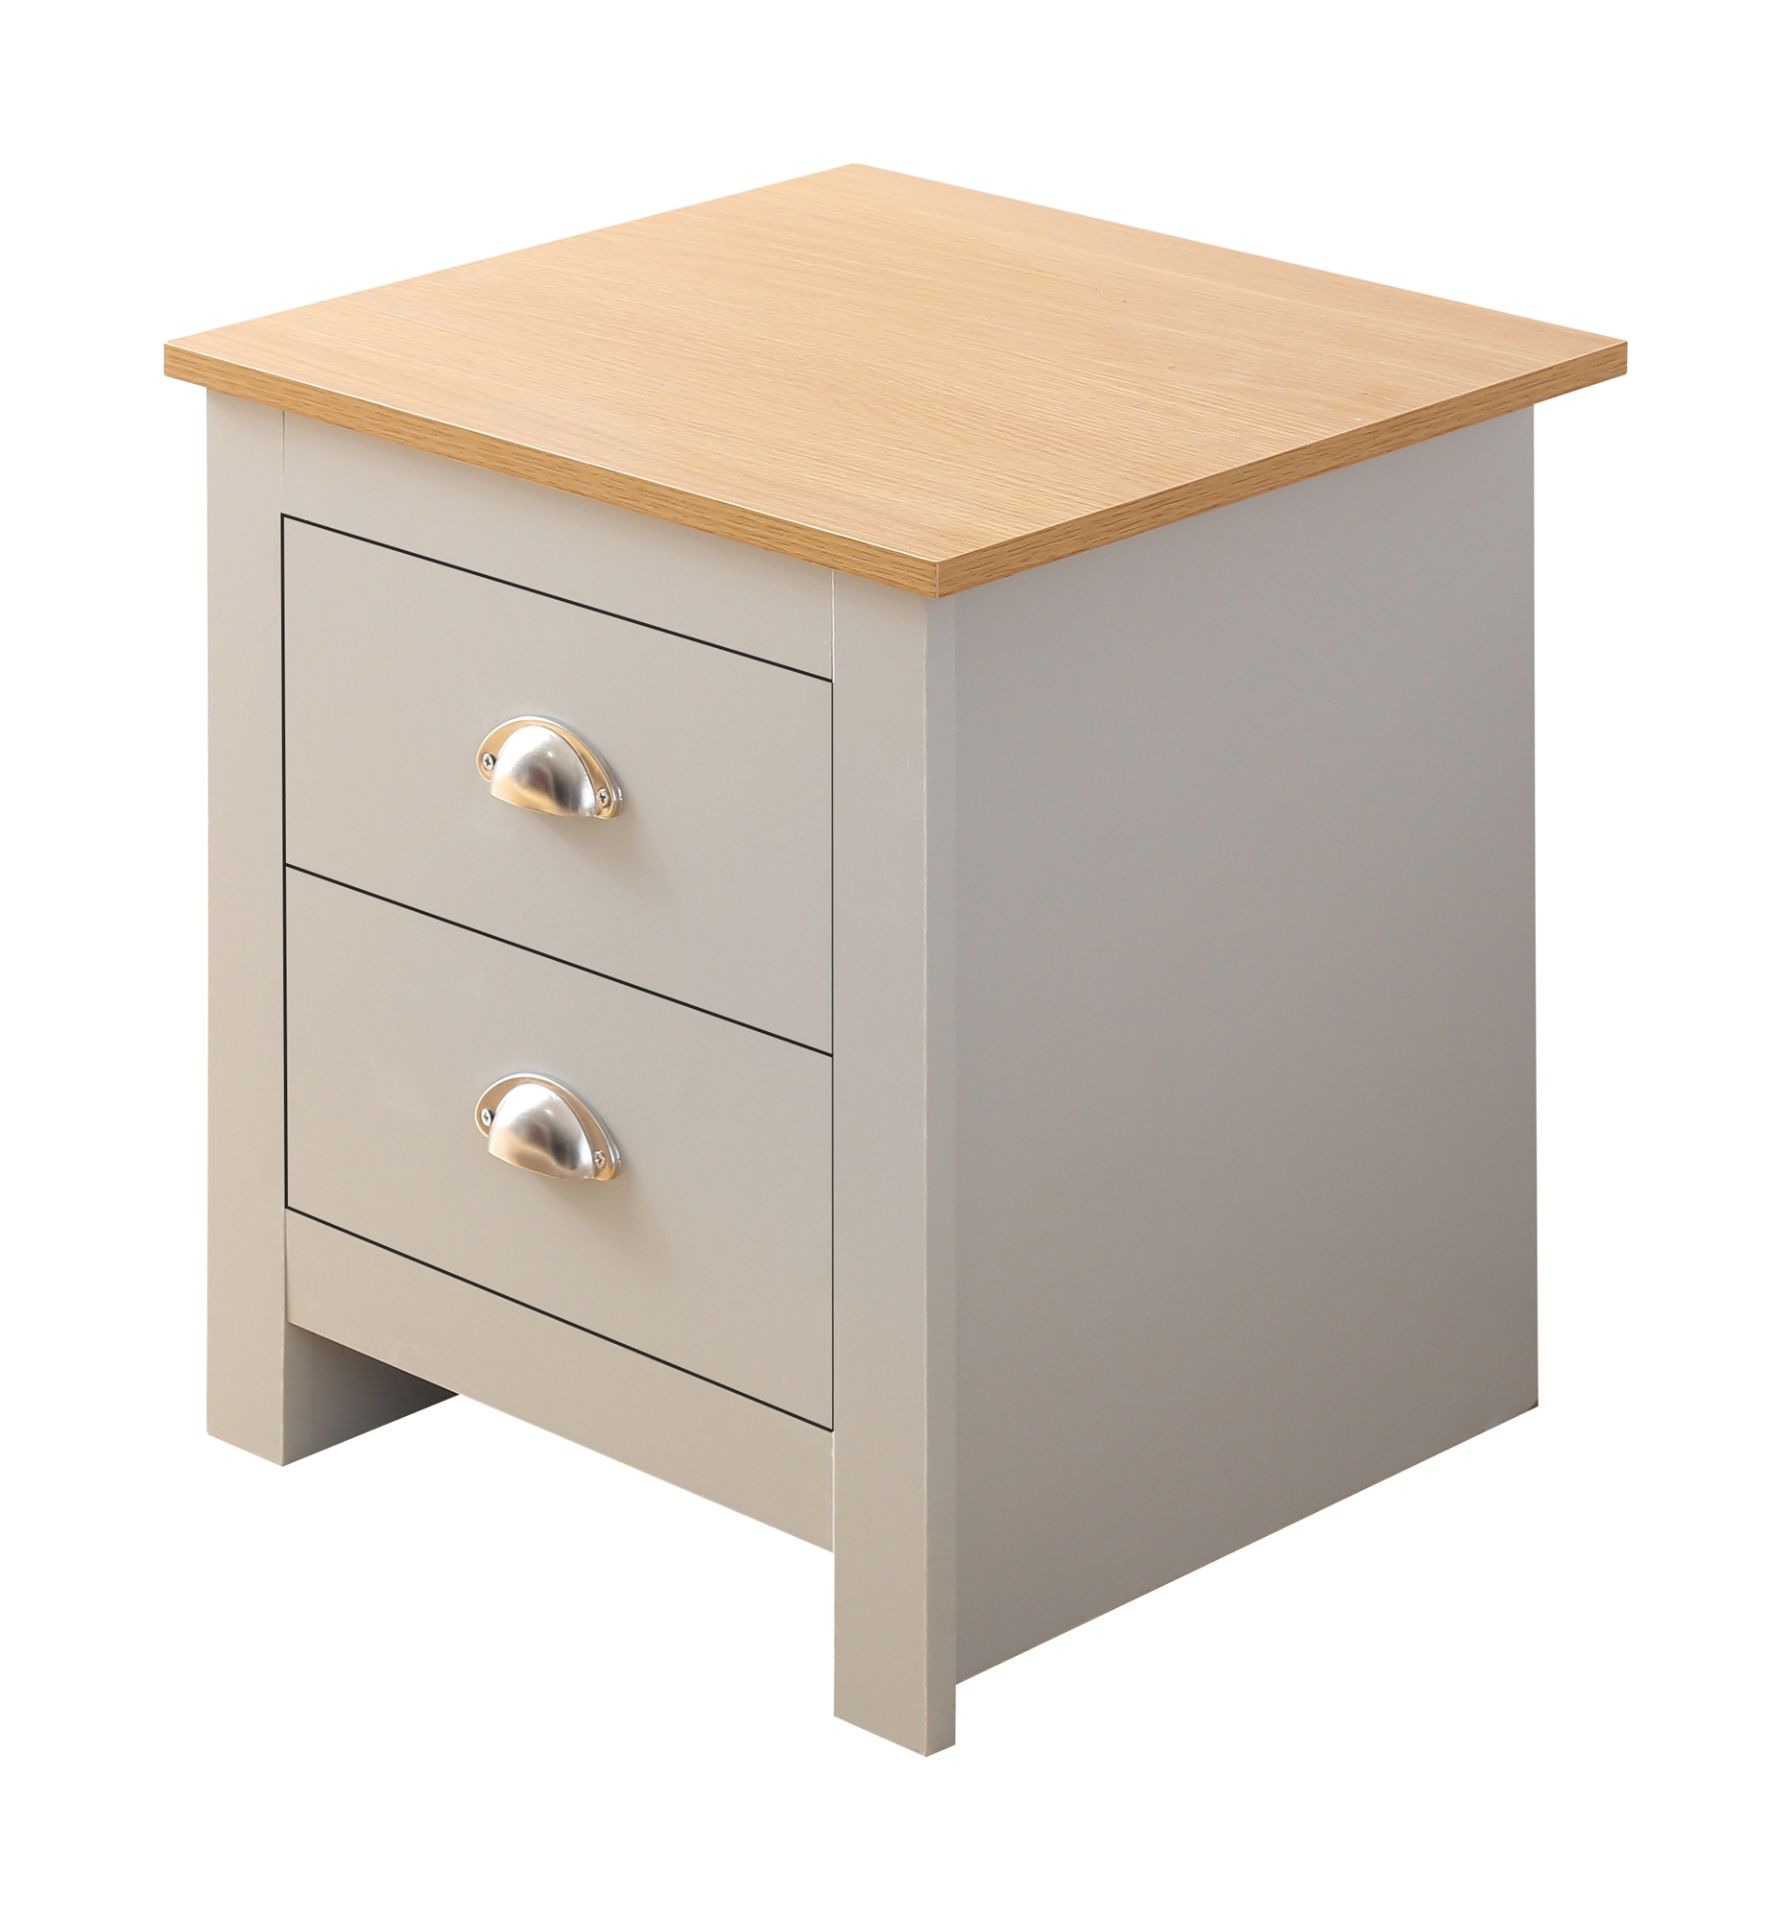 20 X BRAND NEW FLAT PACKED GREY WITH OAK TOP SHAKER-INSPIRED STYLISH DESIGN BEDSIDES - Image 3 of 4